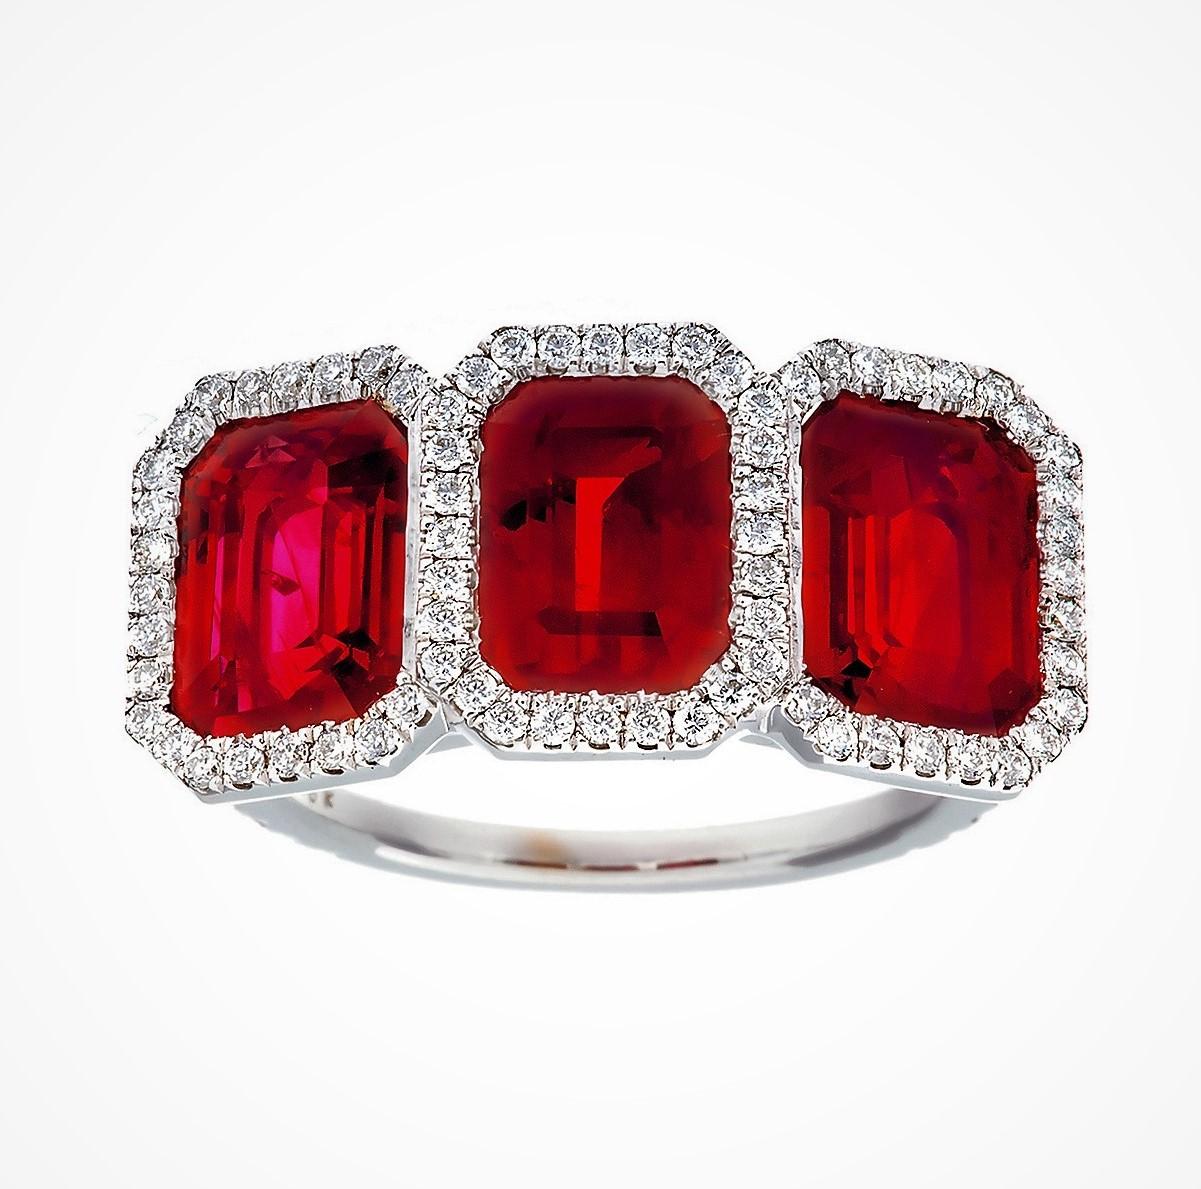 18 Karat White Gold Emerald Cut  3-Stone Burma Ruby And Diamond Ring, 
Set With 3-Matching Rubies To Total 7.05 Carats, 
With Very Fine Pigion Blood Red Color, 
The Ring Is Further Set Around With 92 Small Brilliant Cut Diamonds To Total 0.67 Carats